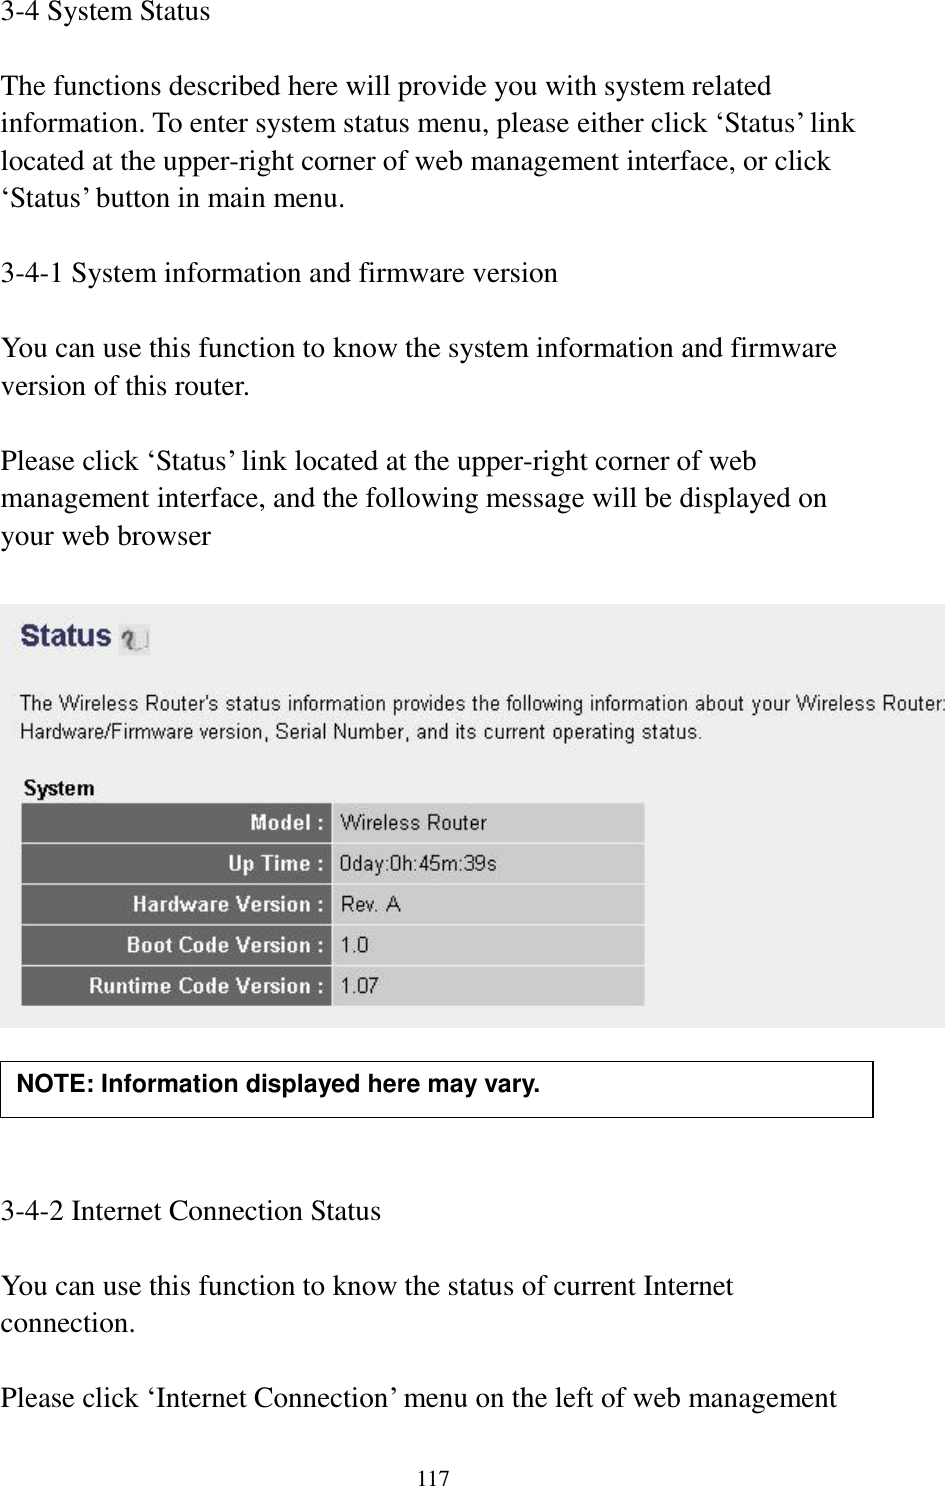 117 3-4 System Status  The functions described here will provide you with system related information. To enter system status menu, please either click ‘Status’ link located at the upper-right corner of web management interface, or click ‘Status’ button in main menu.  3-4-1 System information and firmware version  You can use this function to know the system information and firmware version of this router.  Please click ‘Status’ link located at the upper-right corner of web management interface, and the following message will be displayed on your web browser       3-4-2 Internet Connection Status  You can use this function to know the status of current Internet connection.  Please click ‘Internet Connection’ menu on the left of web management NOTE: Information displayed here may vary. 